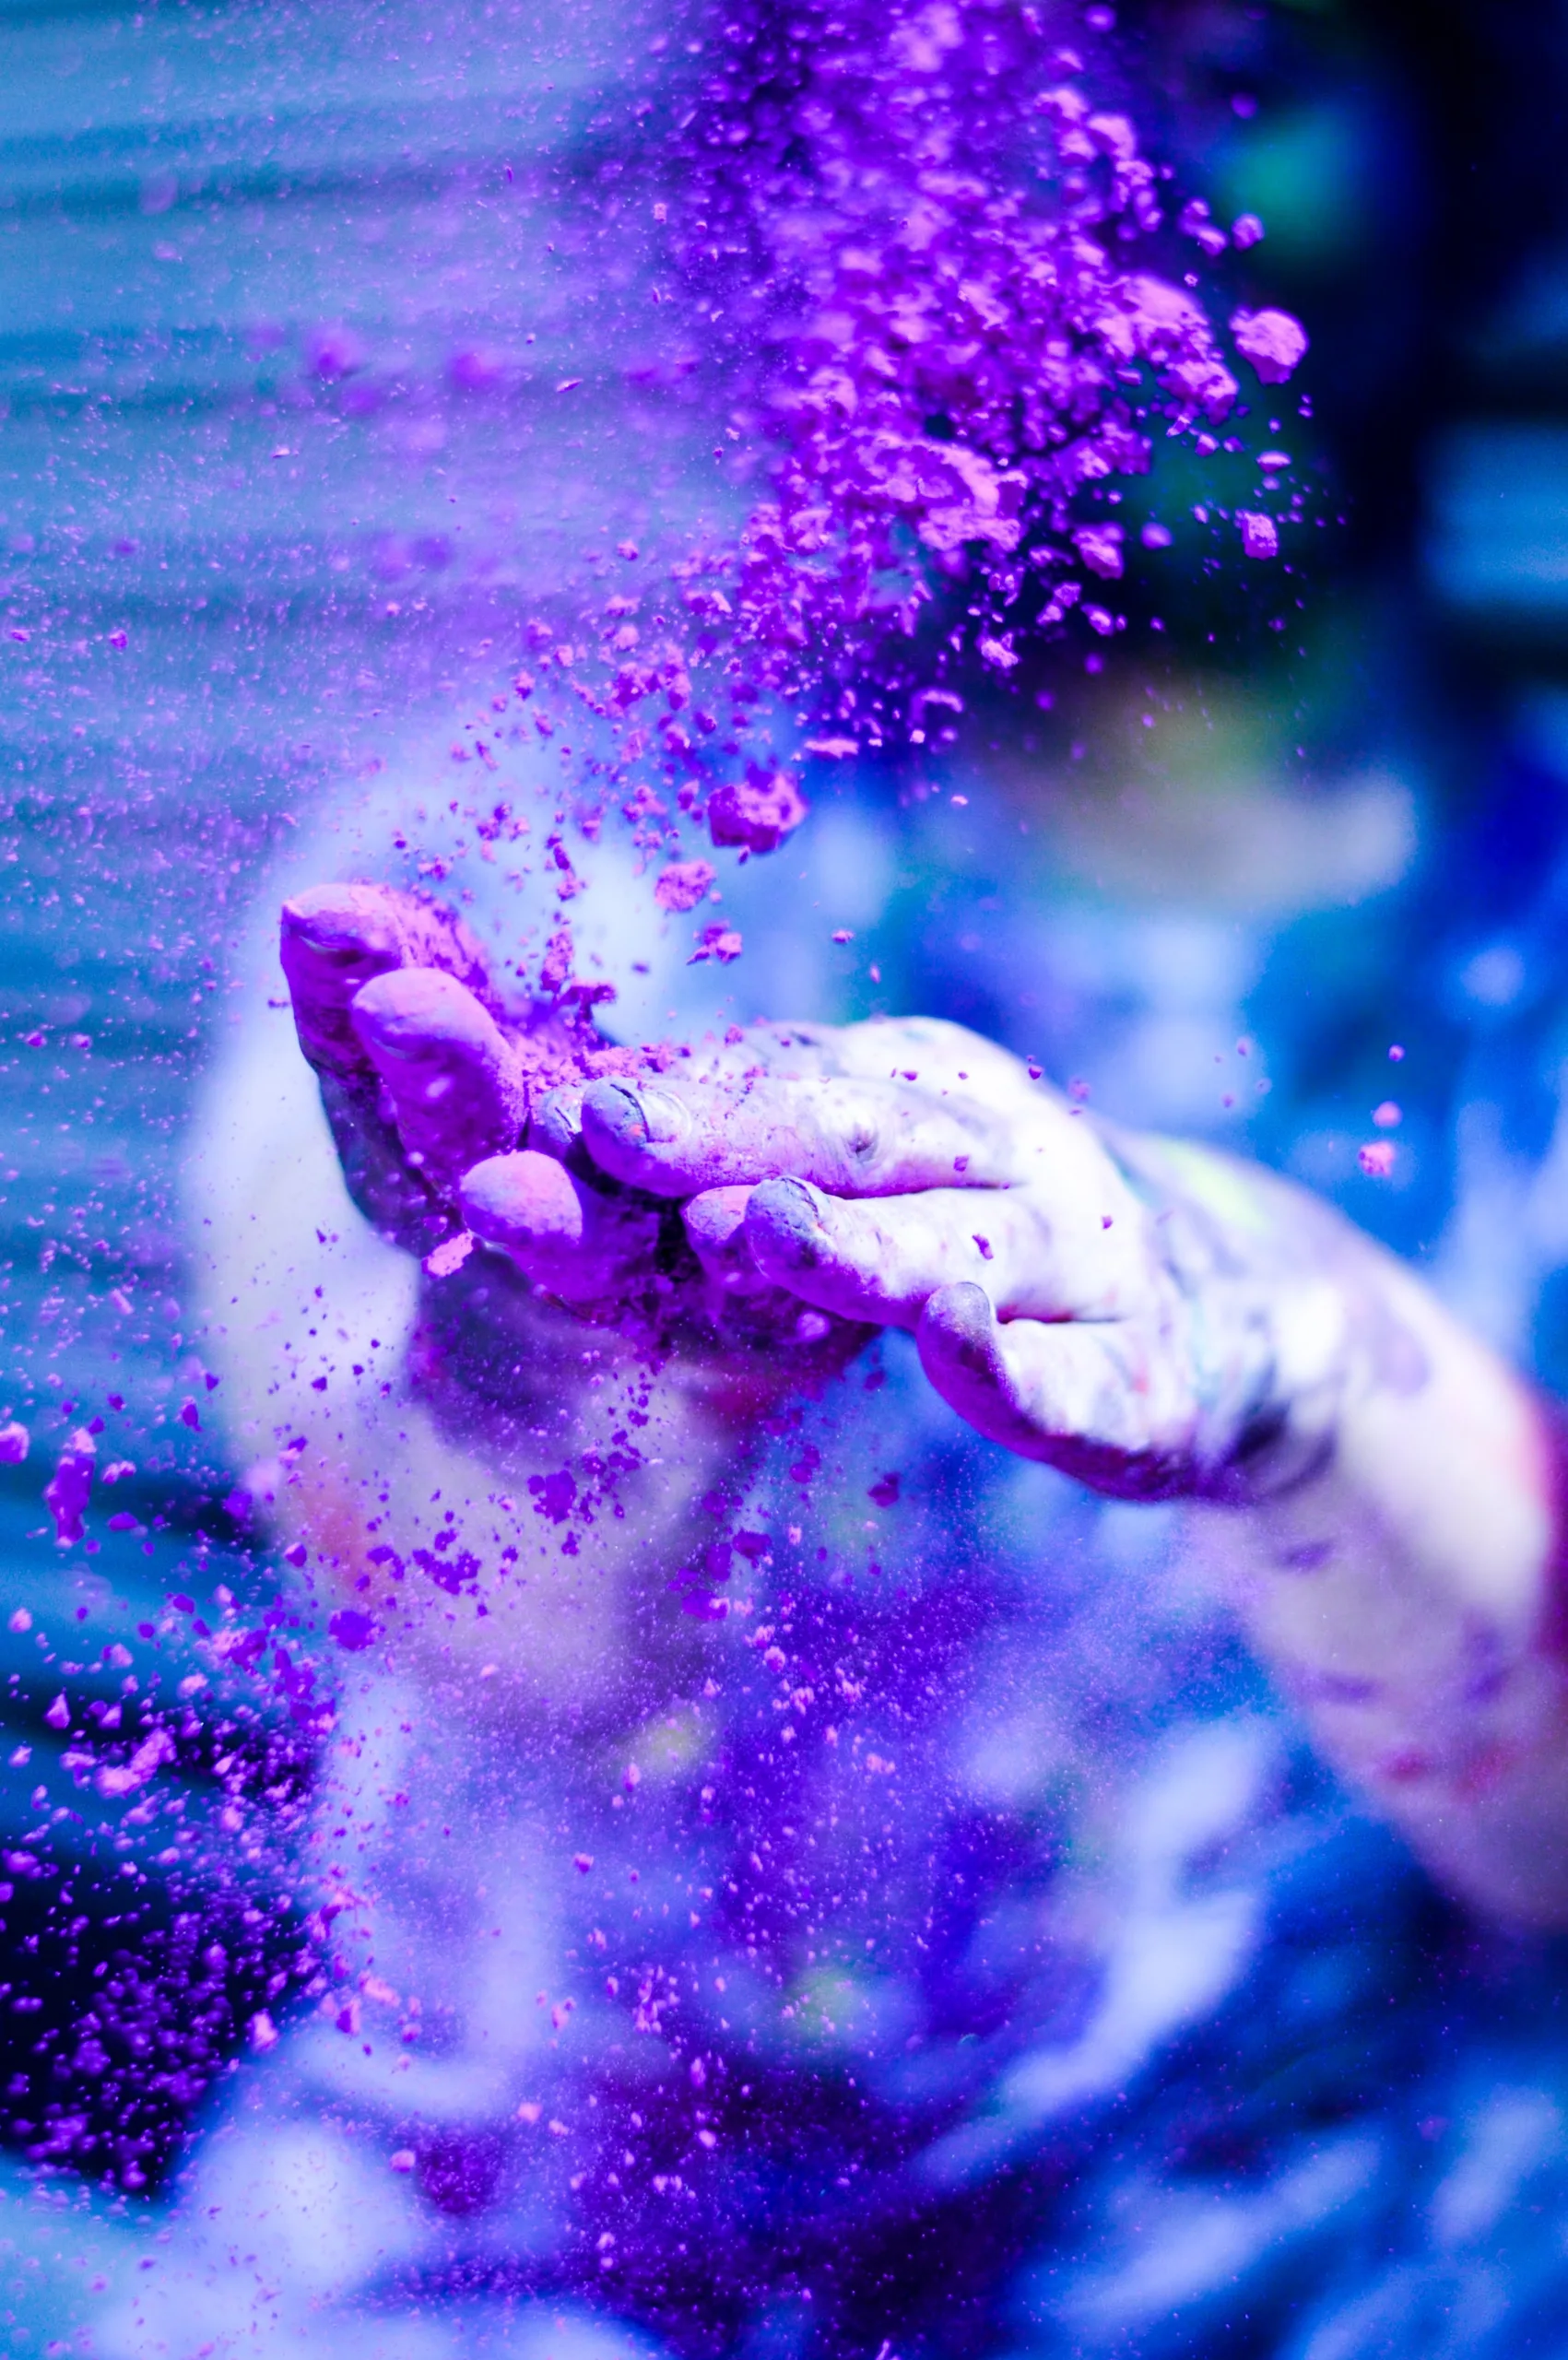 A person's hand is covered in purple powder.